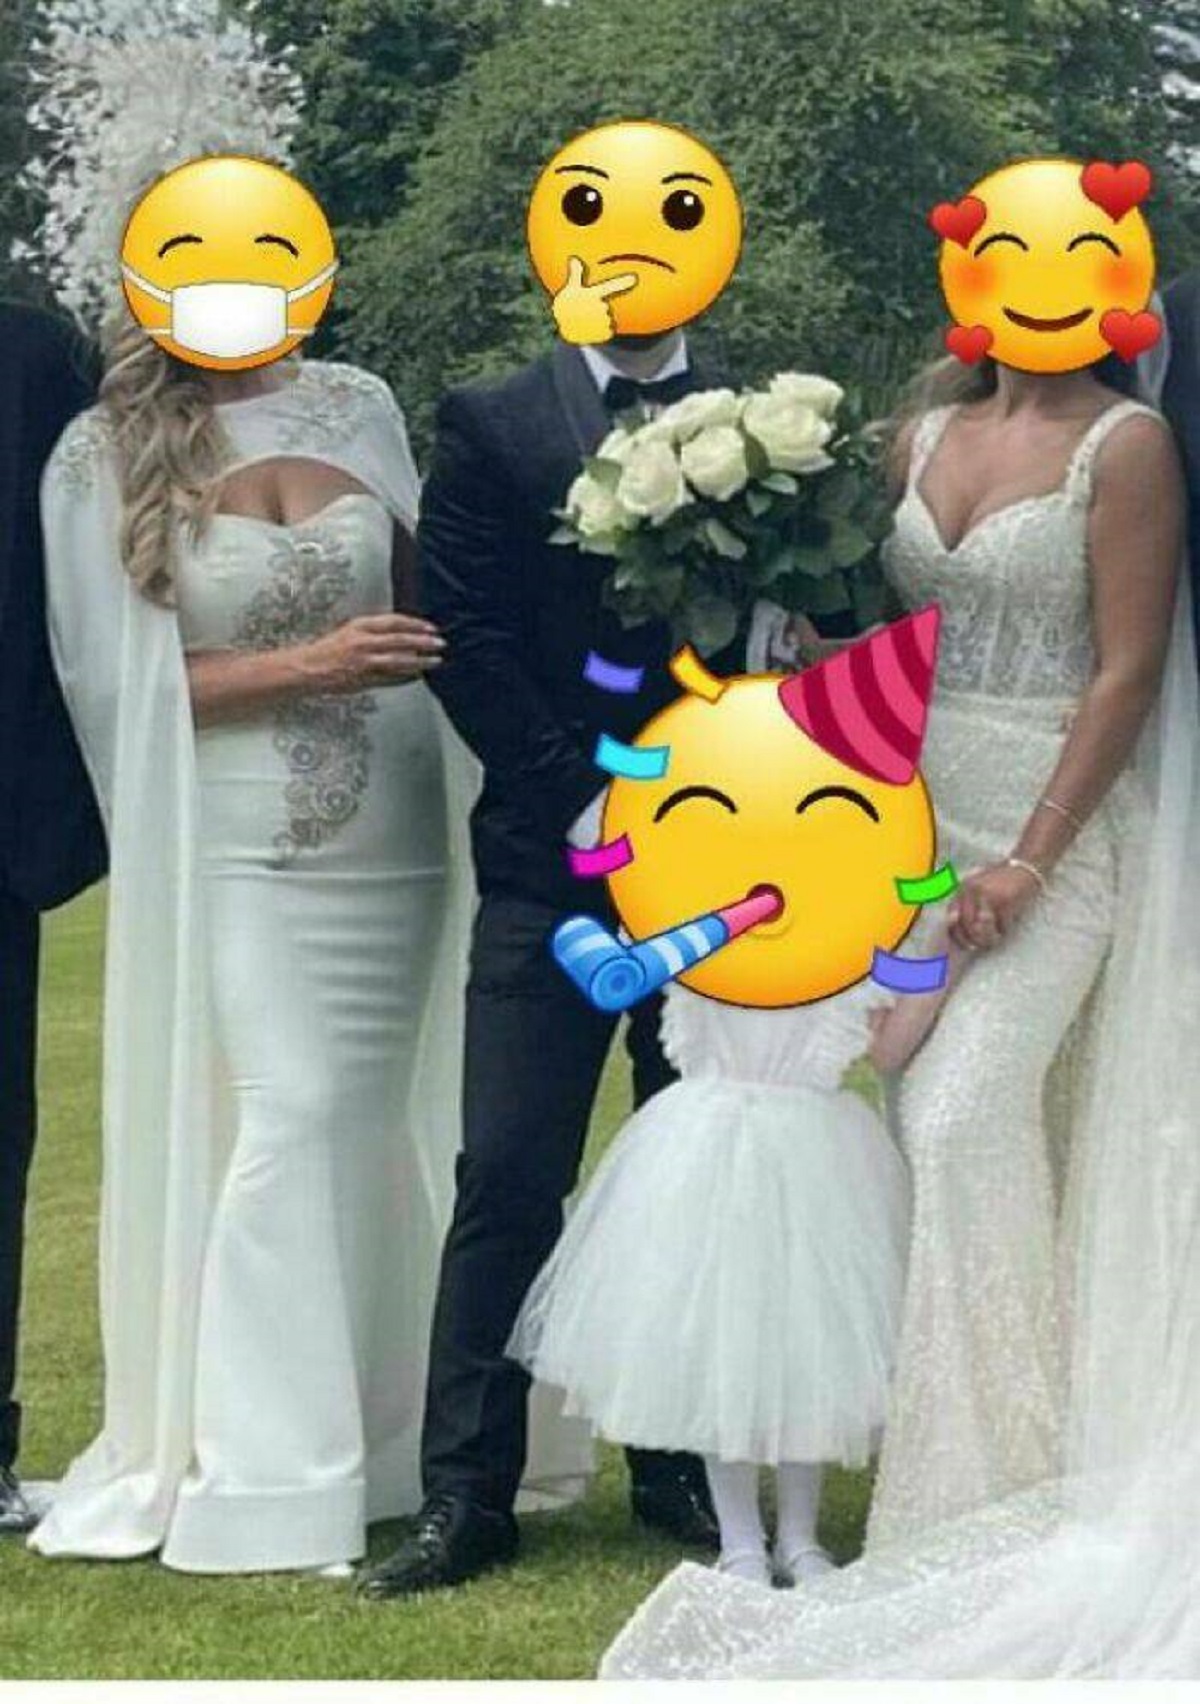 "Motb In White! It Literally Looks Like A Double Wedding To Me"